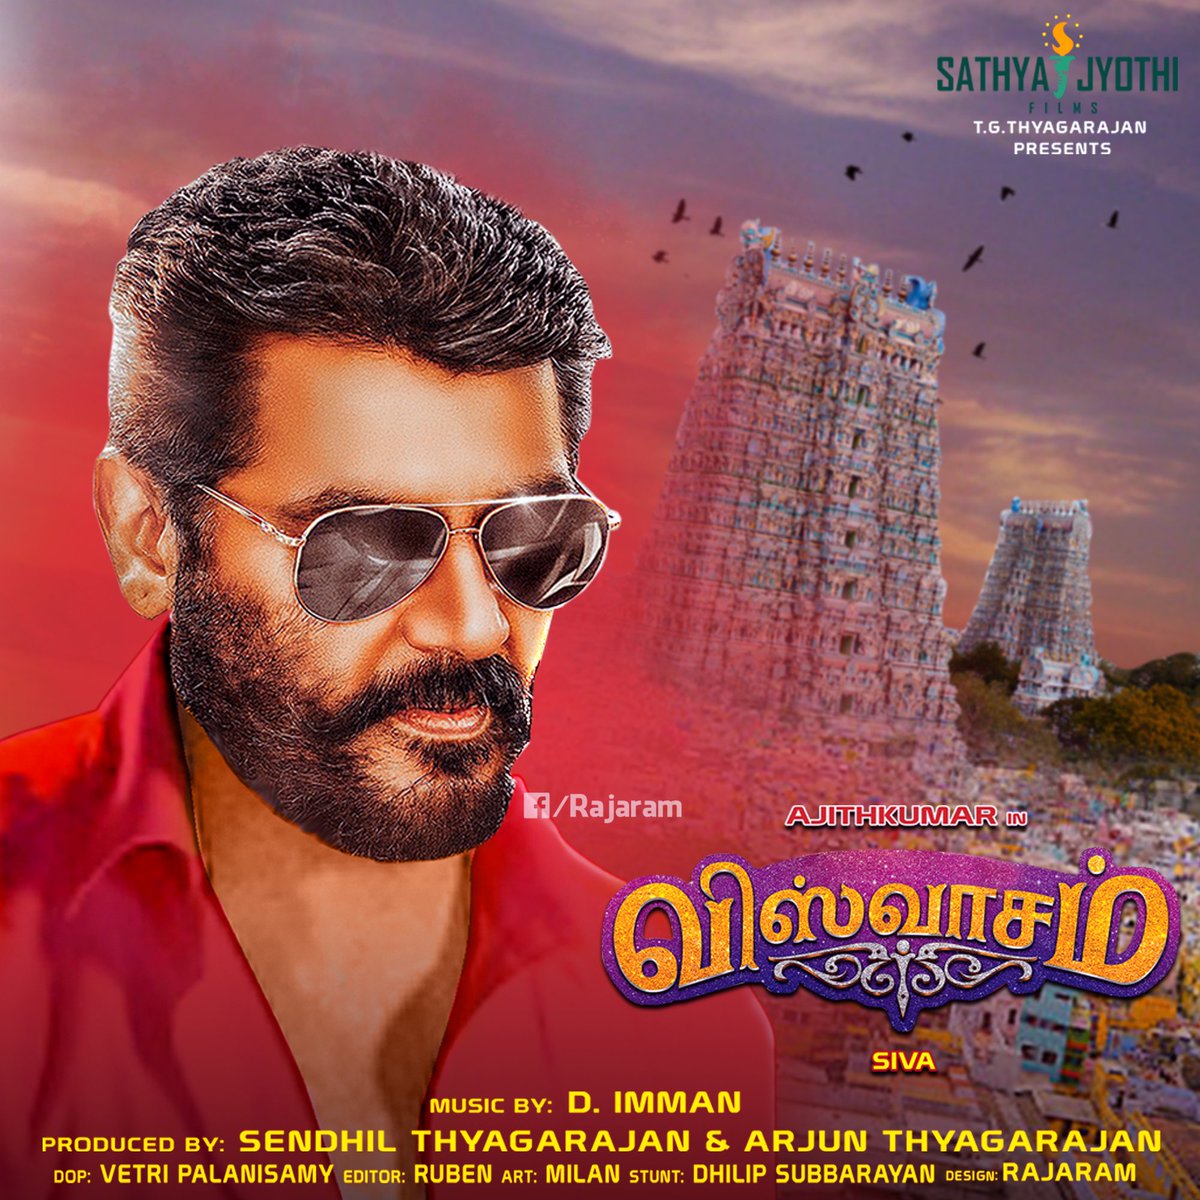 Awesome fan made #Viswasam posters with stills of #Thala #Ajith sir from #ViswasamFirstLook Poster